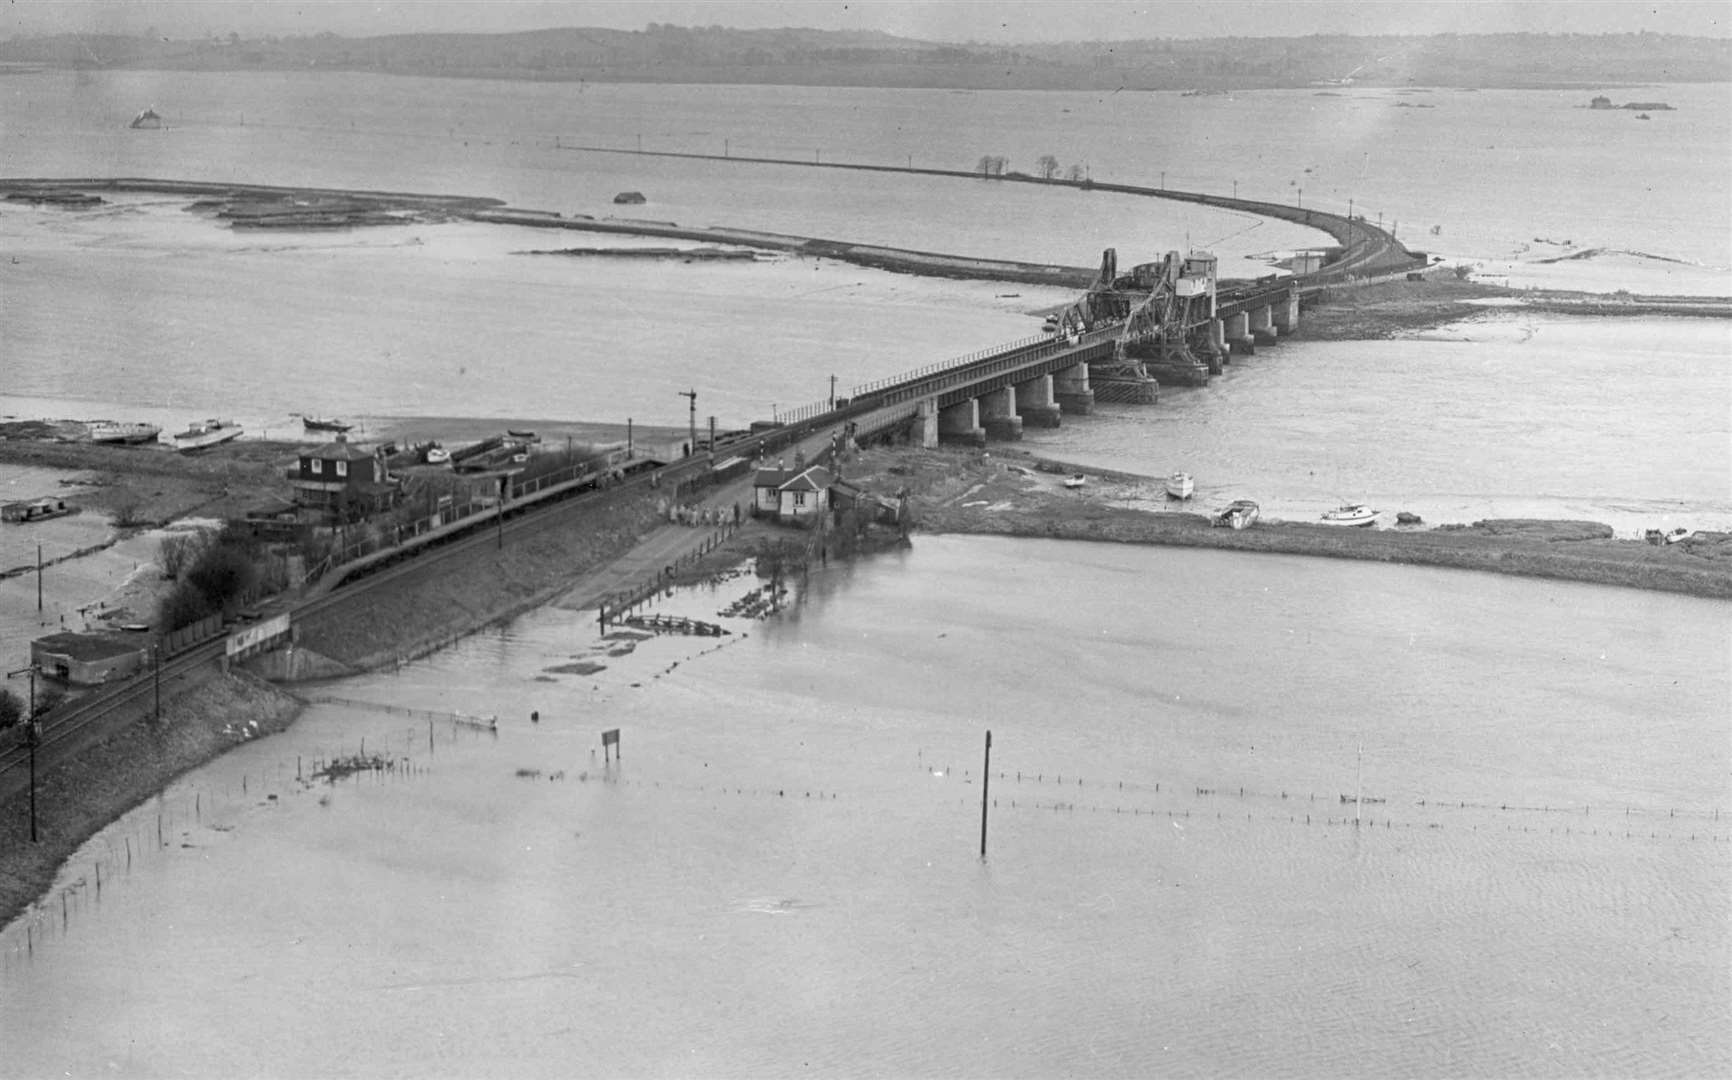 The Isle of Sheppey was completely cut off, isolating some 25,000 people. The flood waters severed road and rail links to the island at Kingsferry Bridge